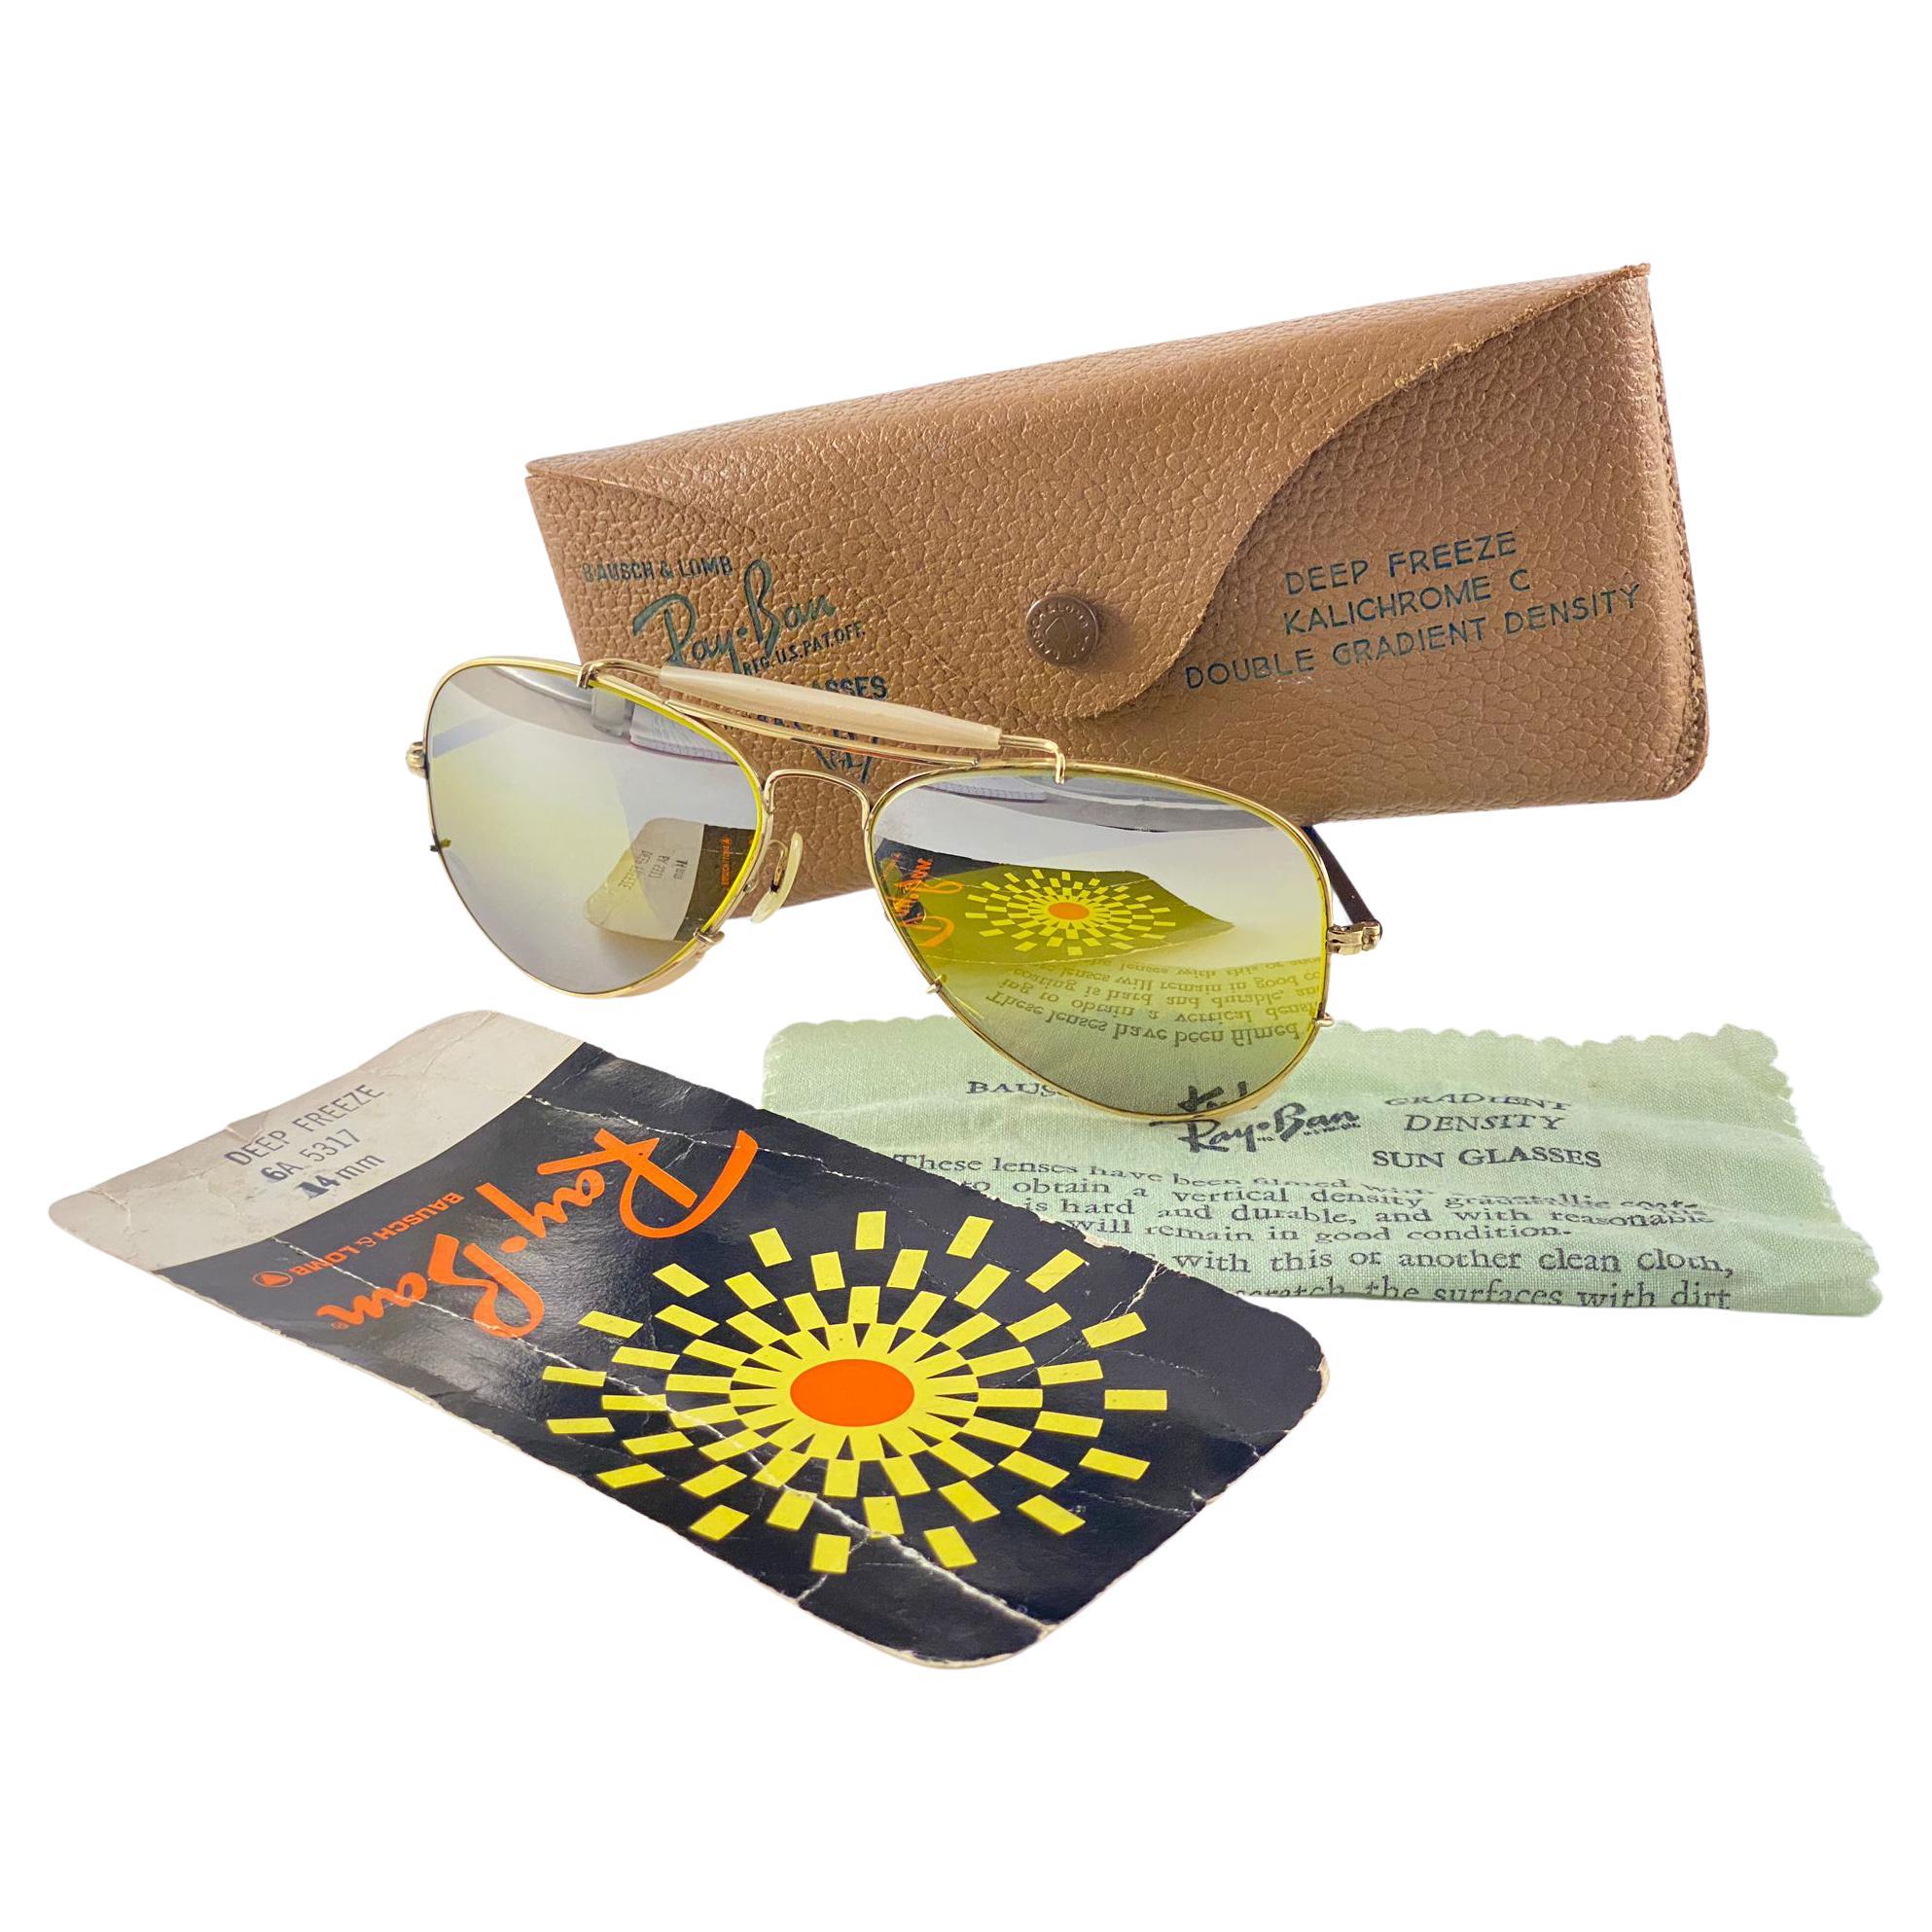 New Ray Ban Deep Freeze 12K Gold Kalichrome Collectors Item USA Sunglasses  For Sale at 1stDibs | kalichrome lenses, ray ban collector, ray ban  kalichrome